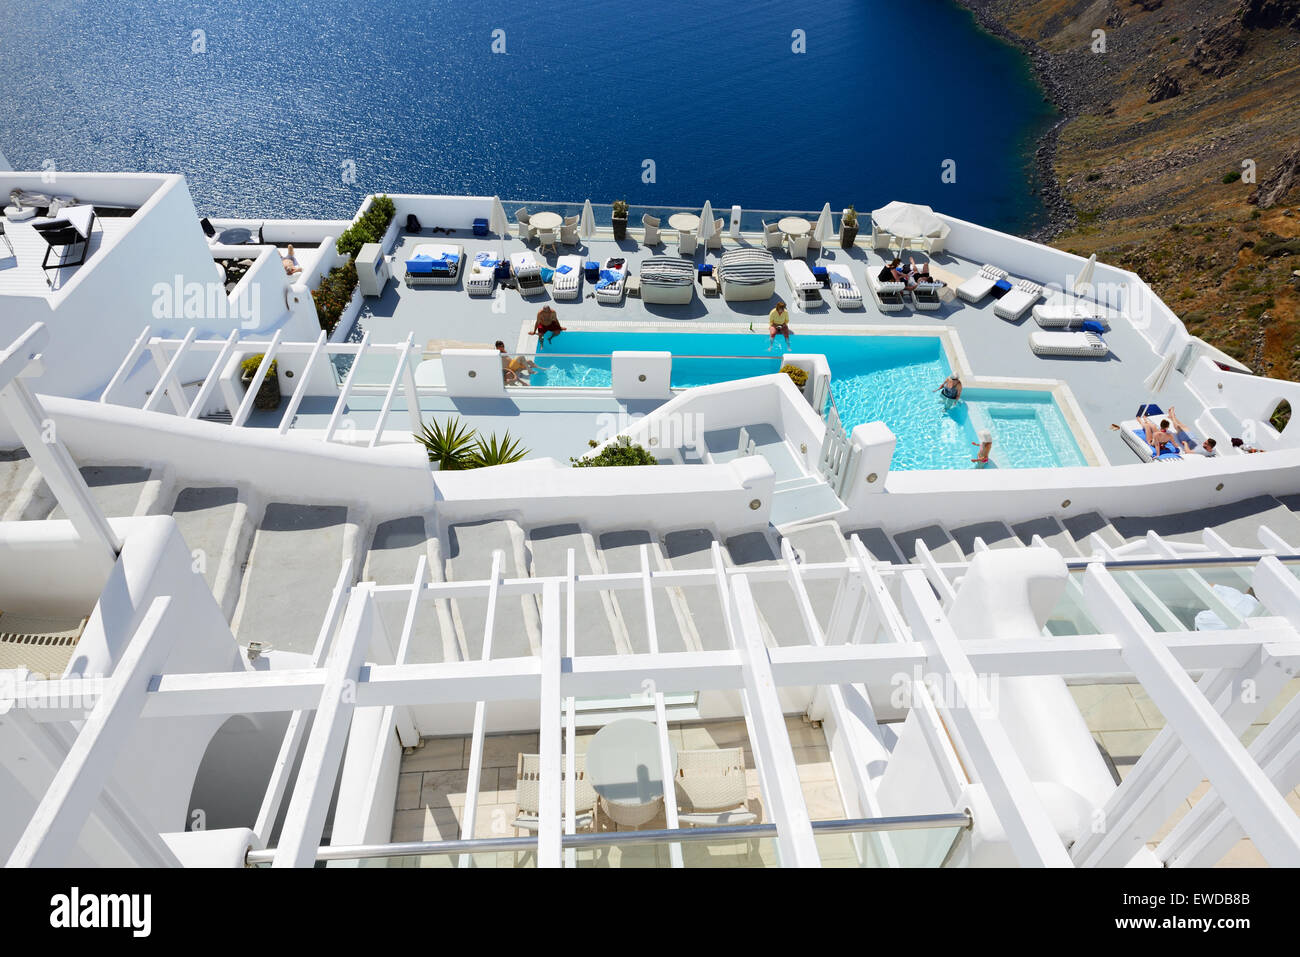 The tourists enjoying their vacation at luxury hotel, Oia, Greece Stock Photo